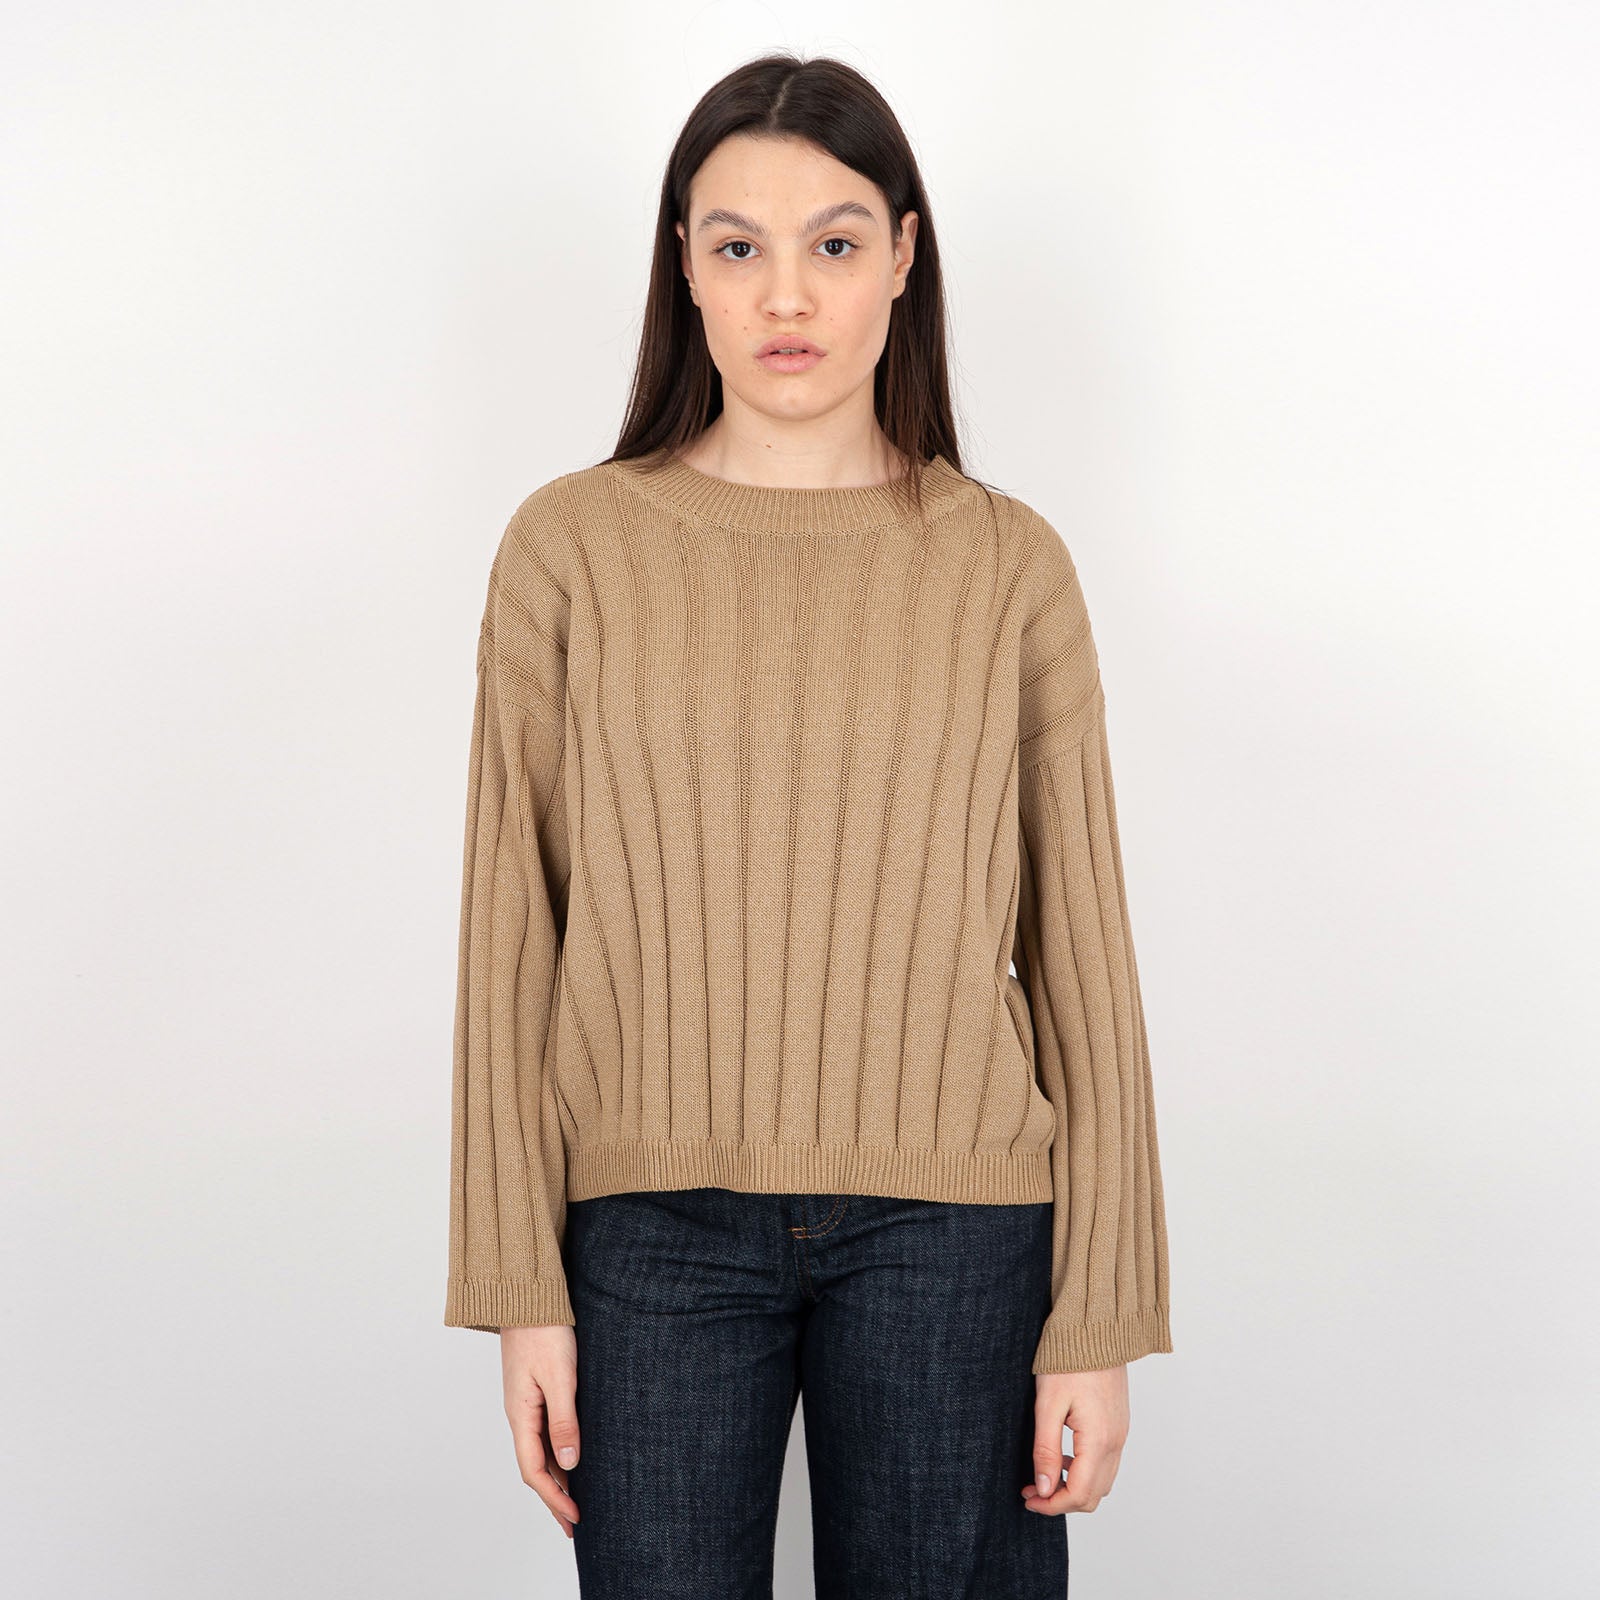 Grifoni Ribbed Sand Knit in Cotton/Polyamide - 6